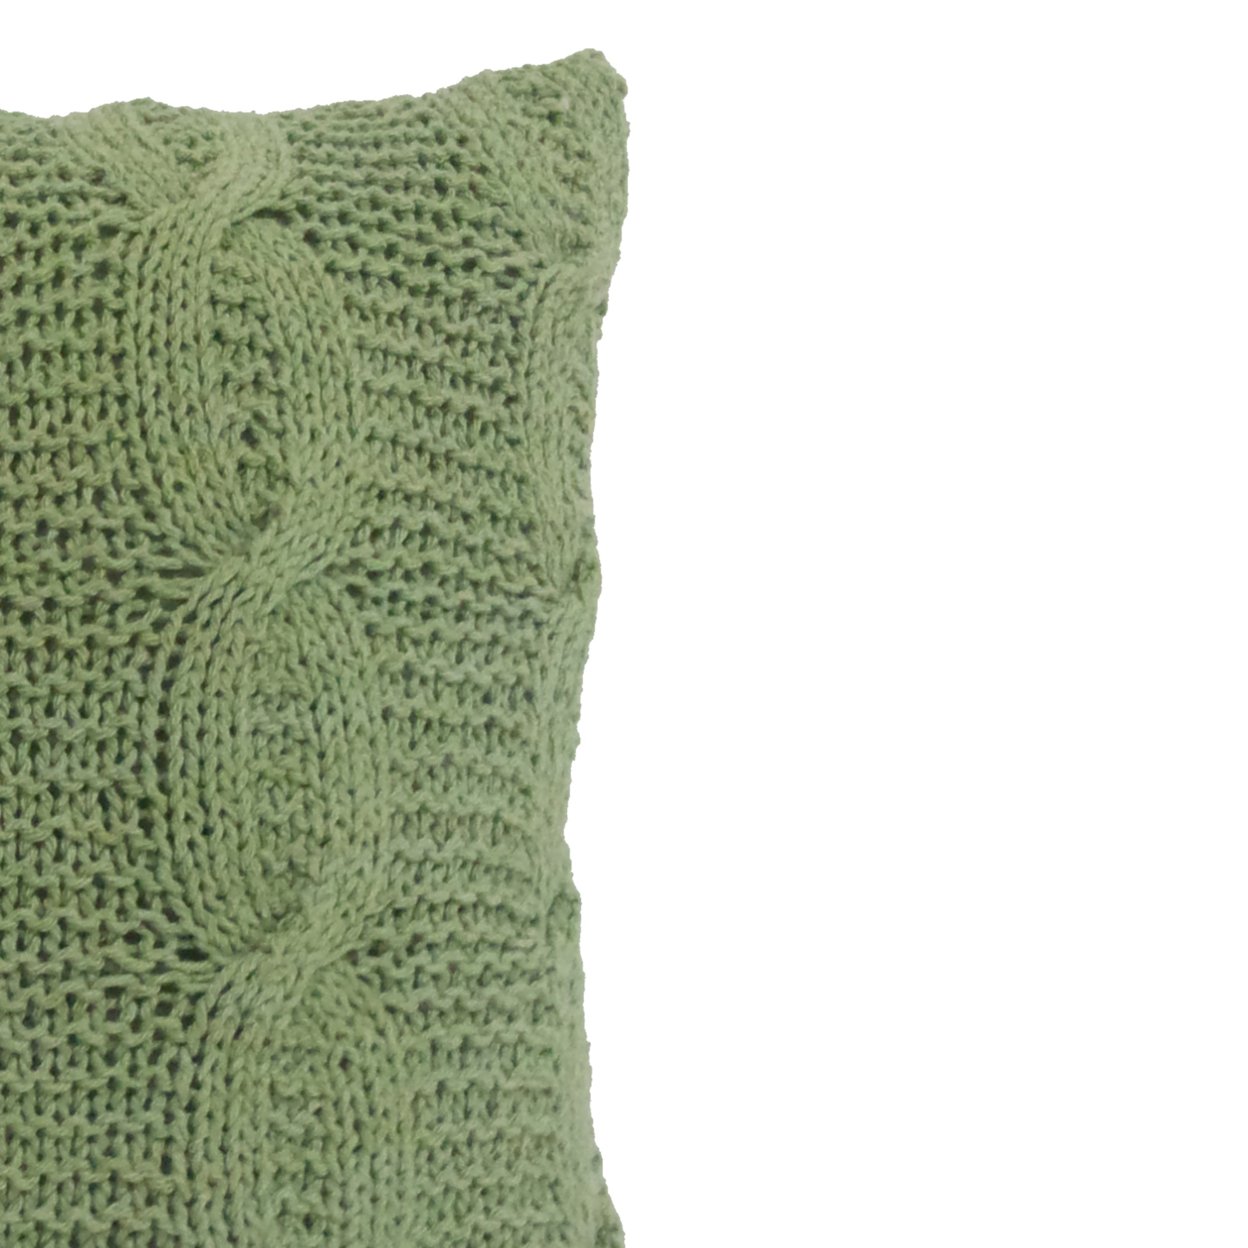 18 X 18 Inch Cotton Cable Knit Pillow With Twisted Details, Set Of 2, Green- Saltoro Sherpi